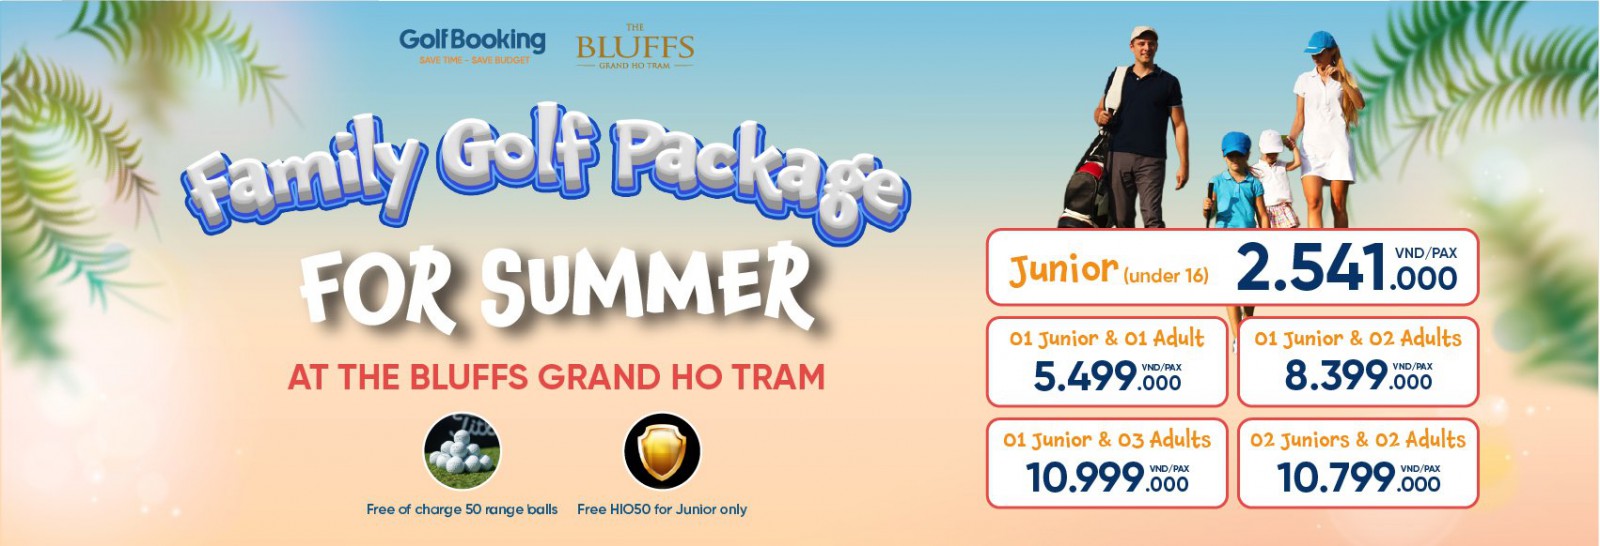 Family Golf Package for Summer tại The Bluffs Grand Ho Tram